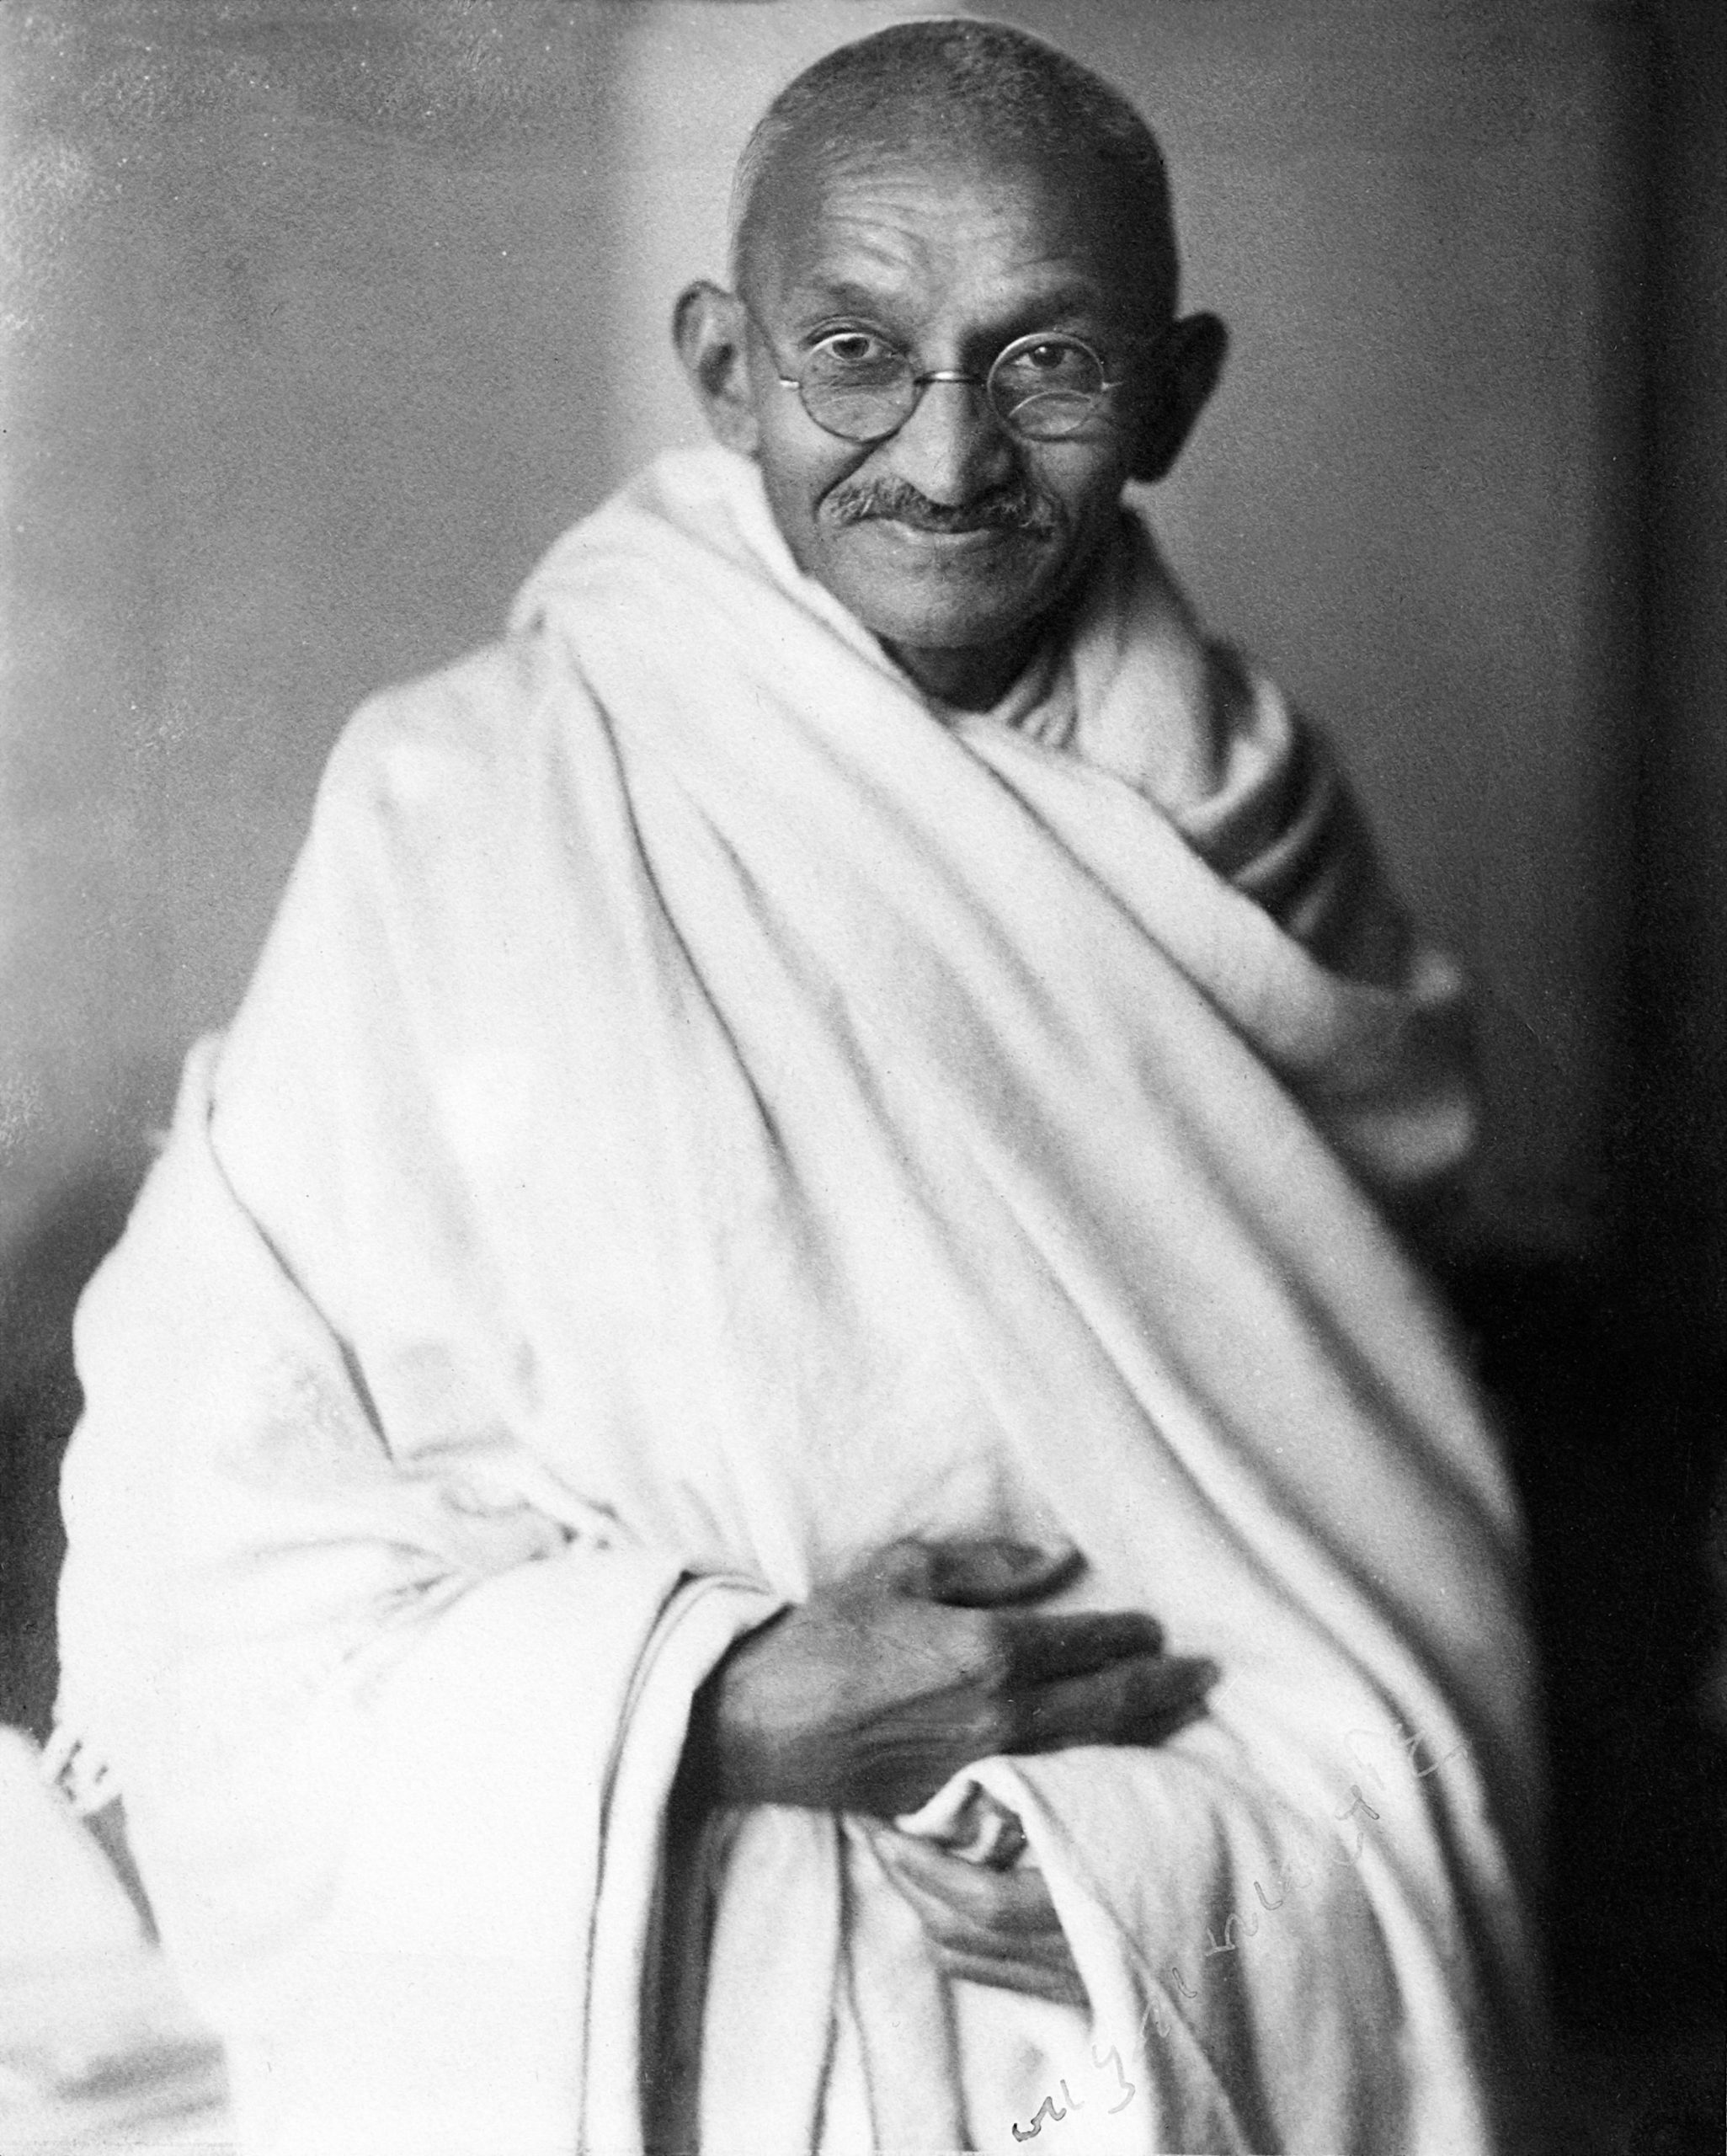 Special programme to commemorate in memory of Mahatma Gandhi on Martyr’s Day